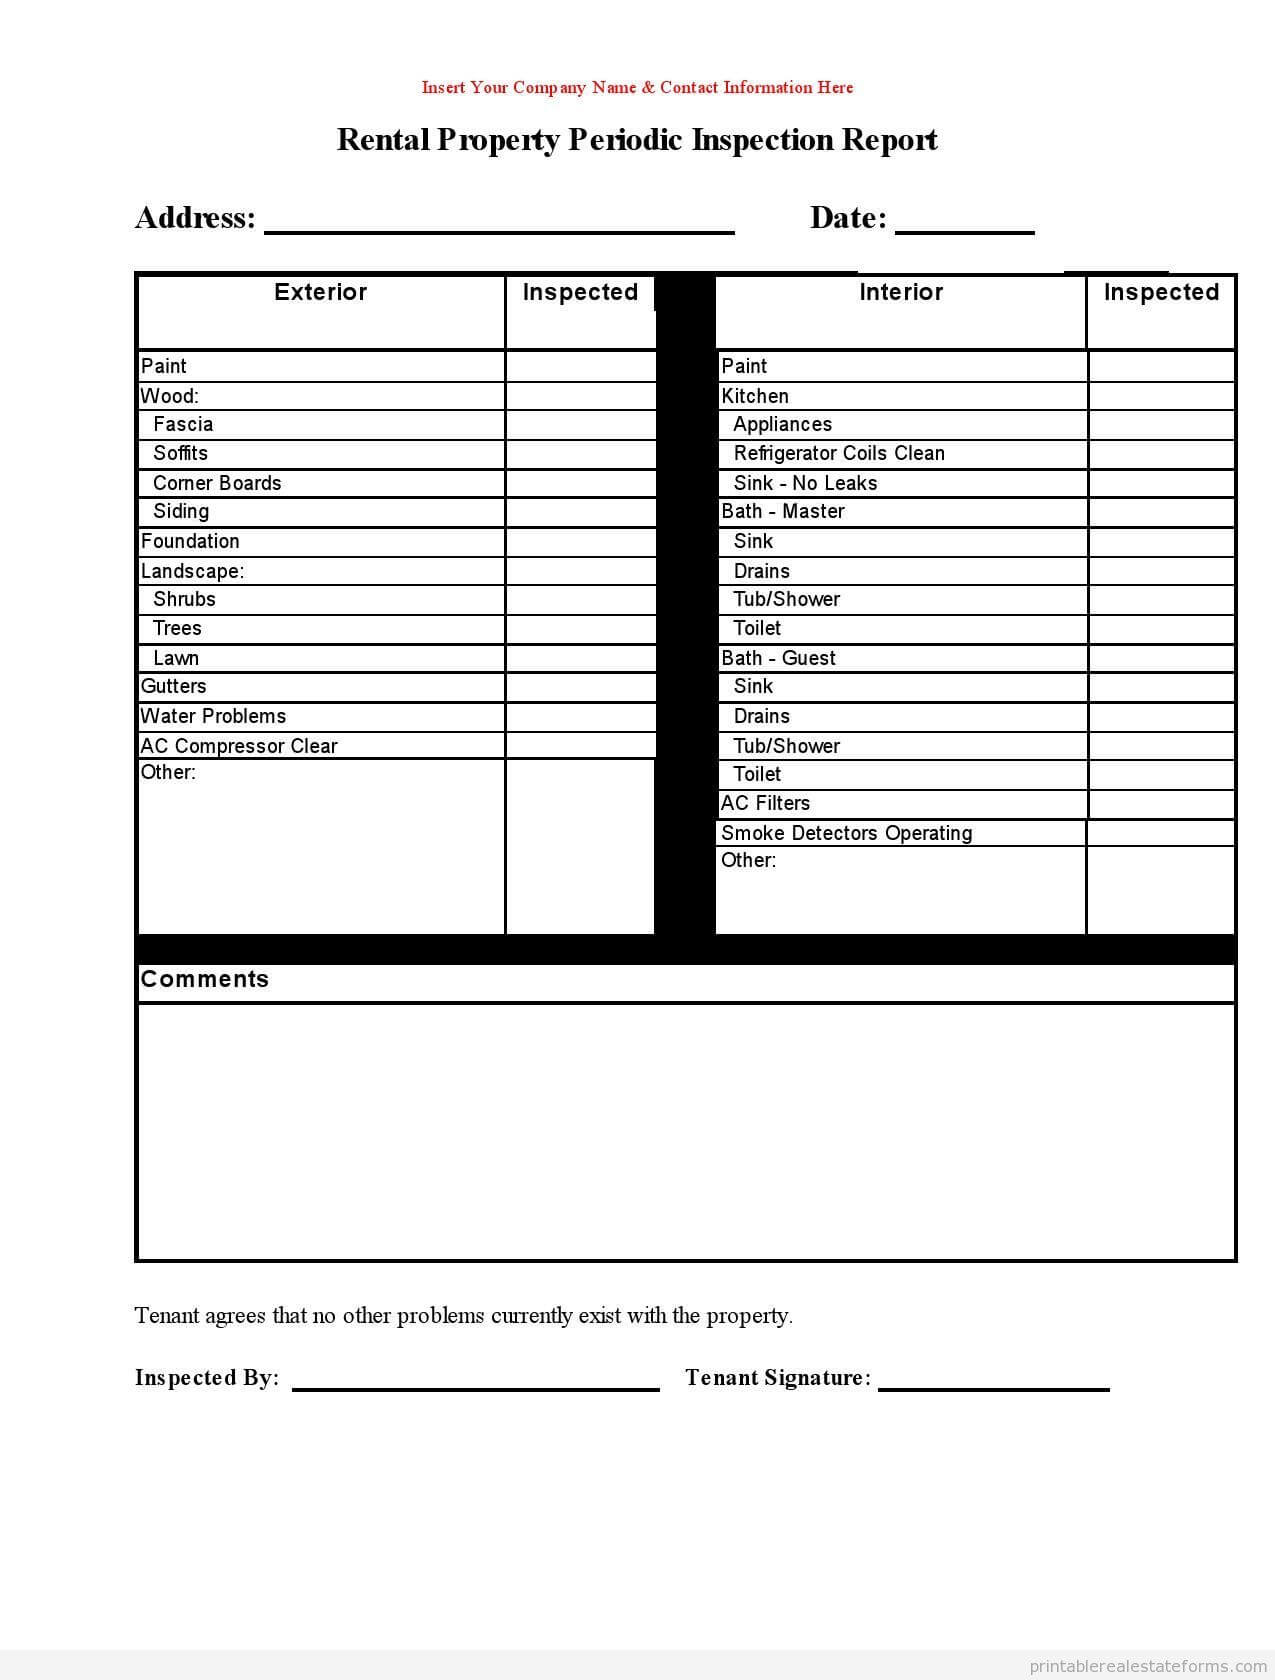 Free Printable Rental Property Periodic Inspection Report With Regard To Drainage Report Template